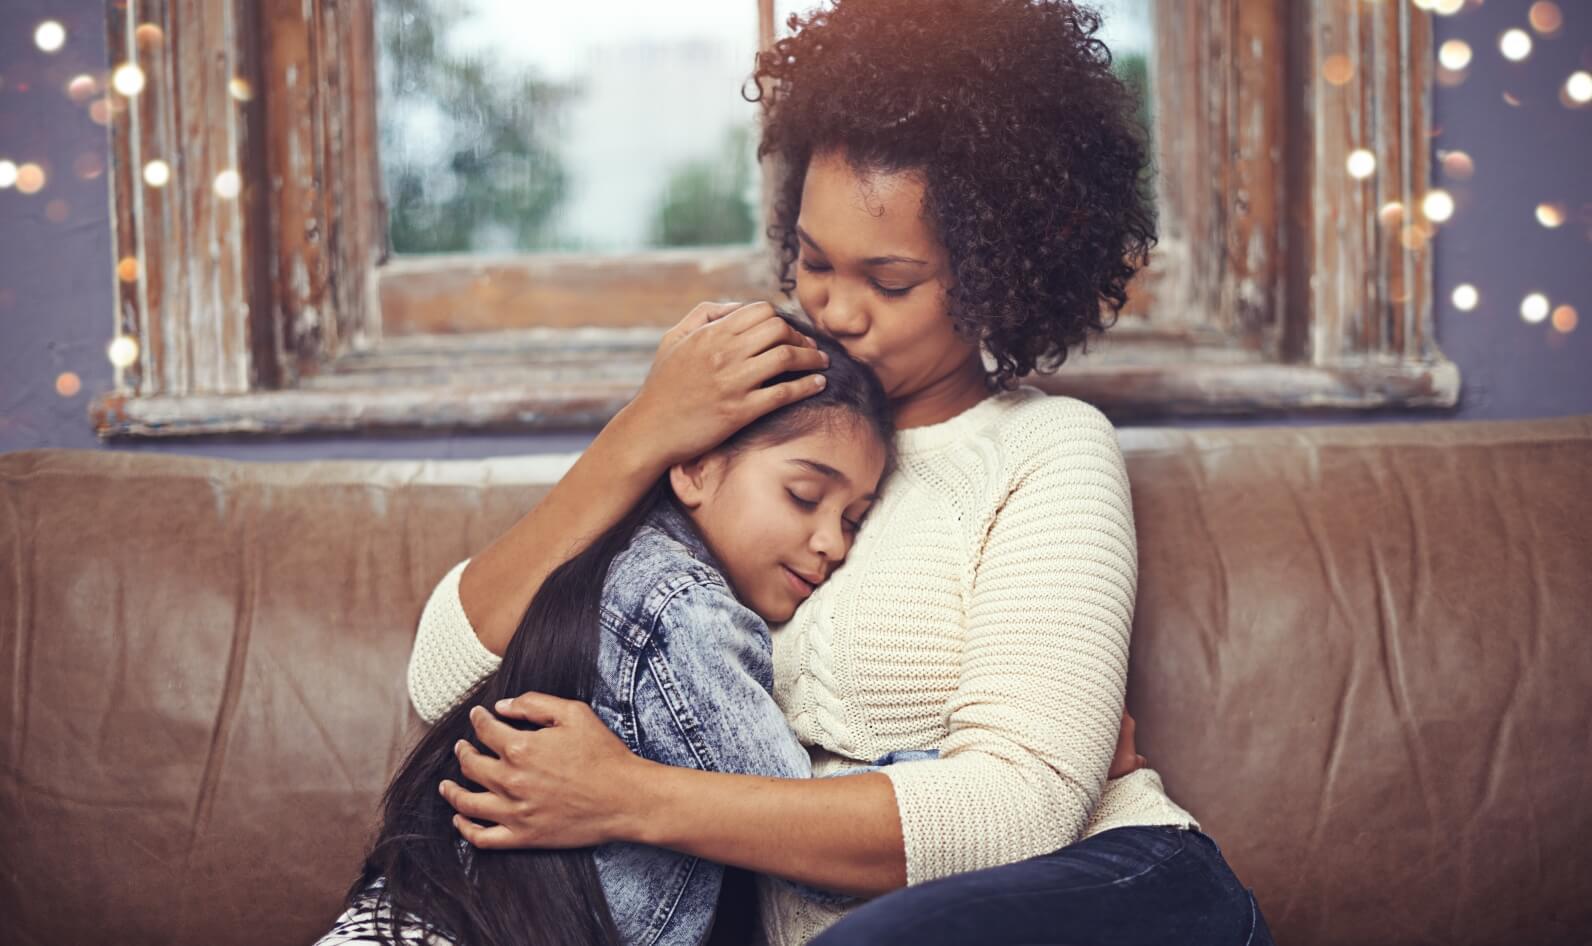 A mother and her daughter are sitting on a couch together. The mother is holding the daughter in her arms and the daughter is resting her head on the mother's shoulder. They are both smiling and look happy.